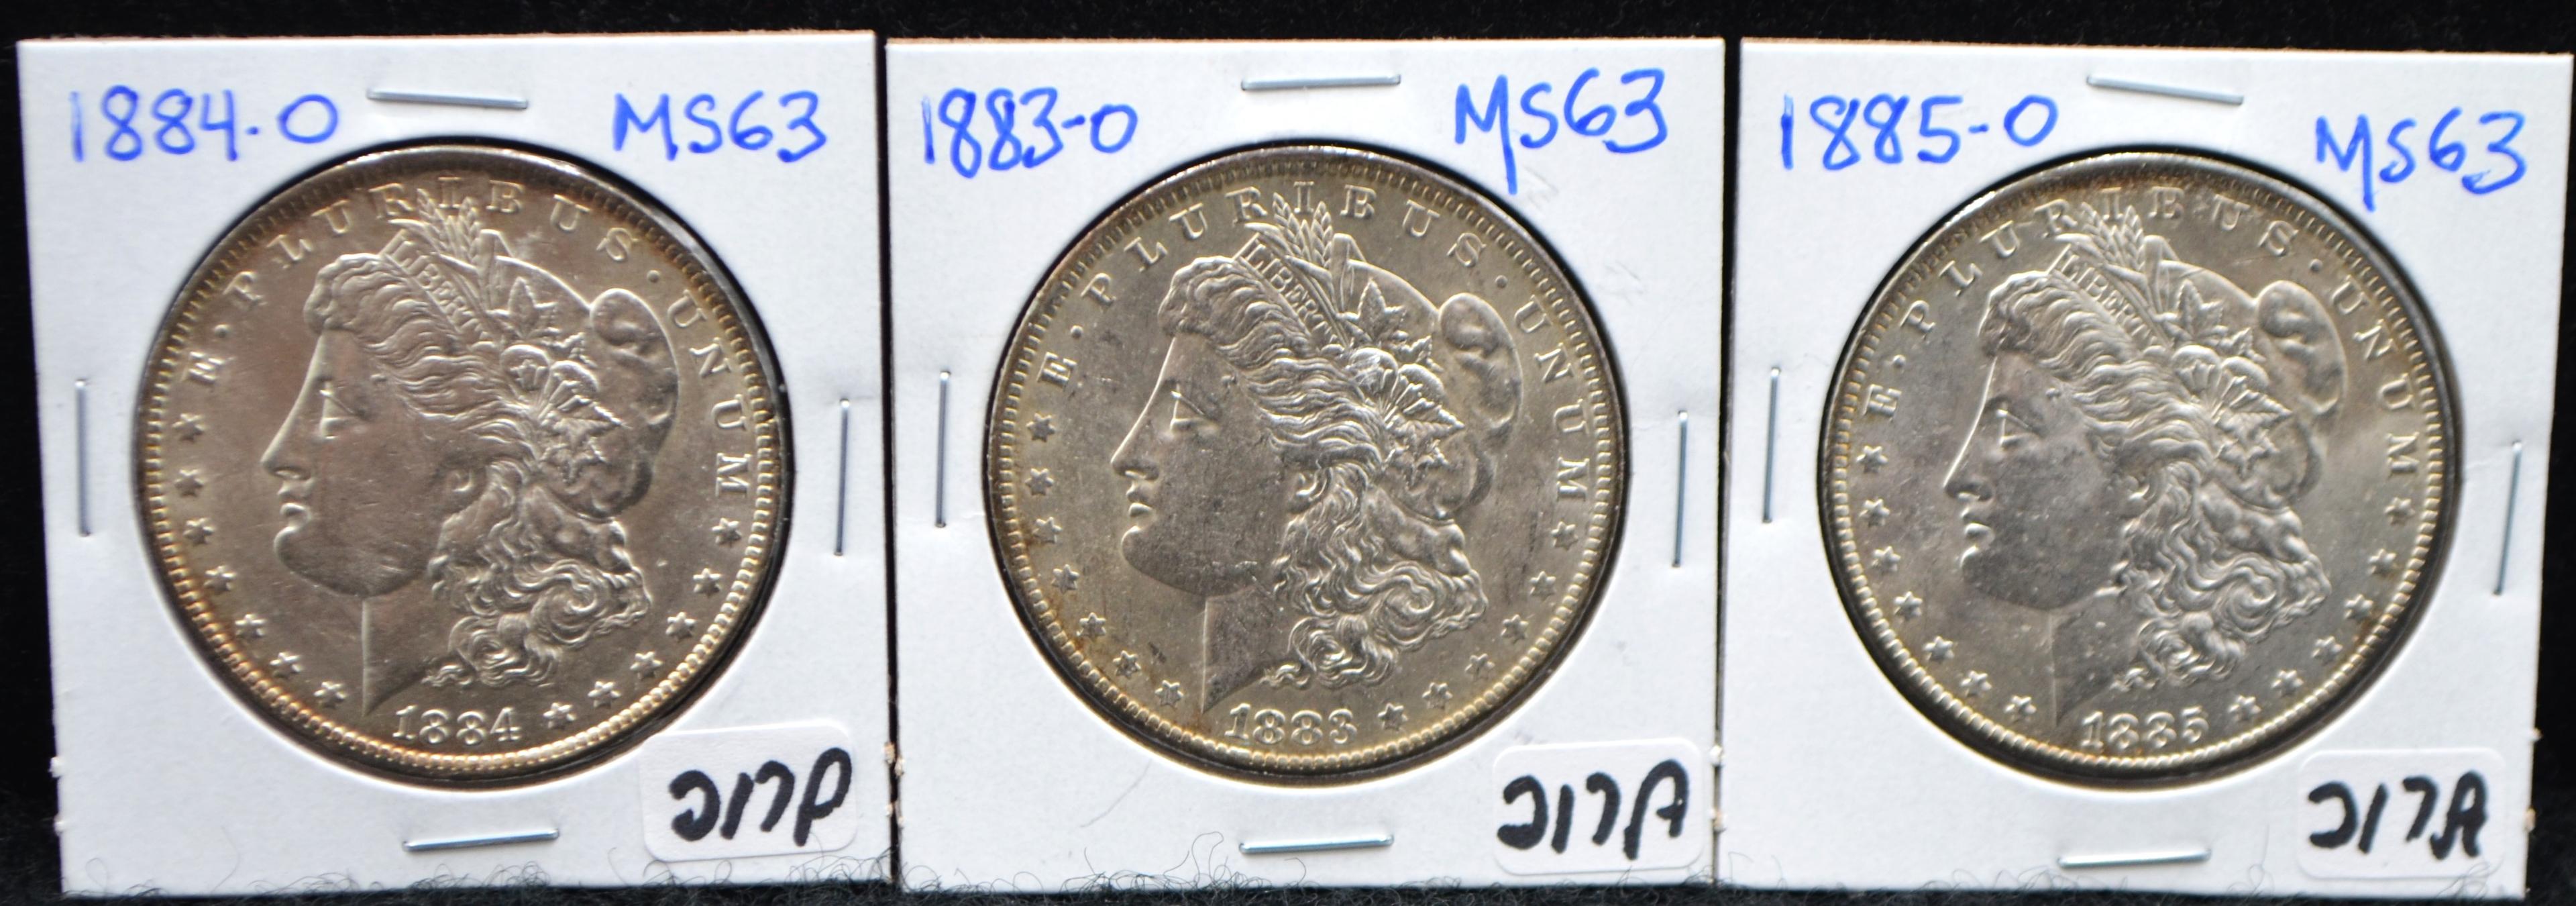 1883-0, 1884-0, 1885-0 MORGANS FROM LARGE COLLECTN